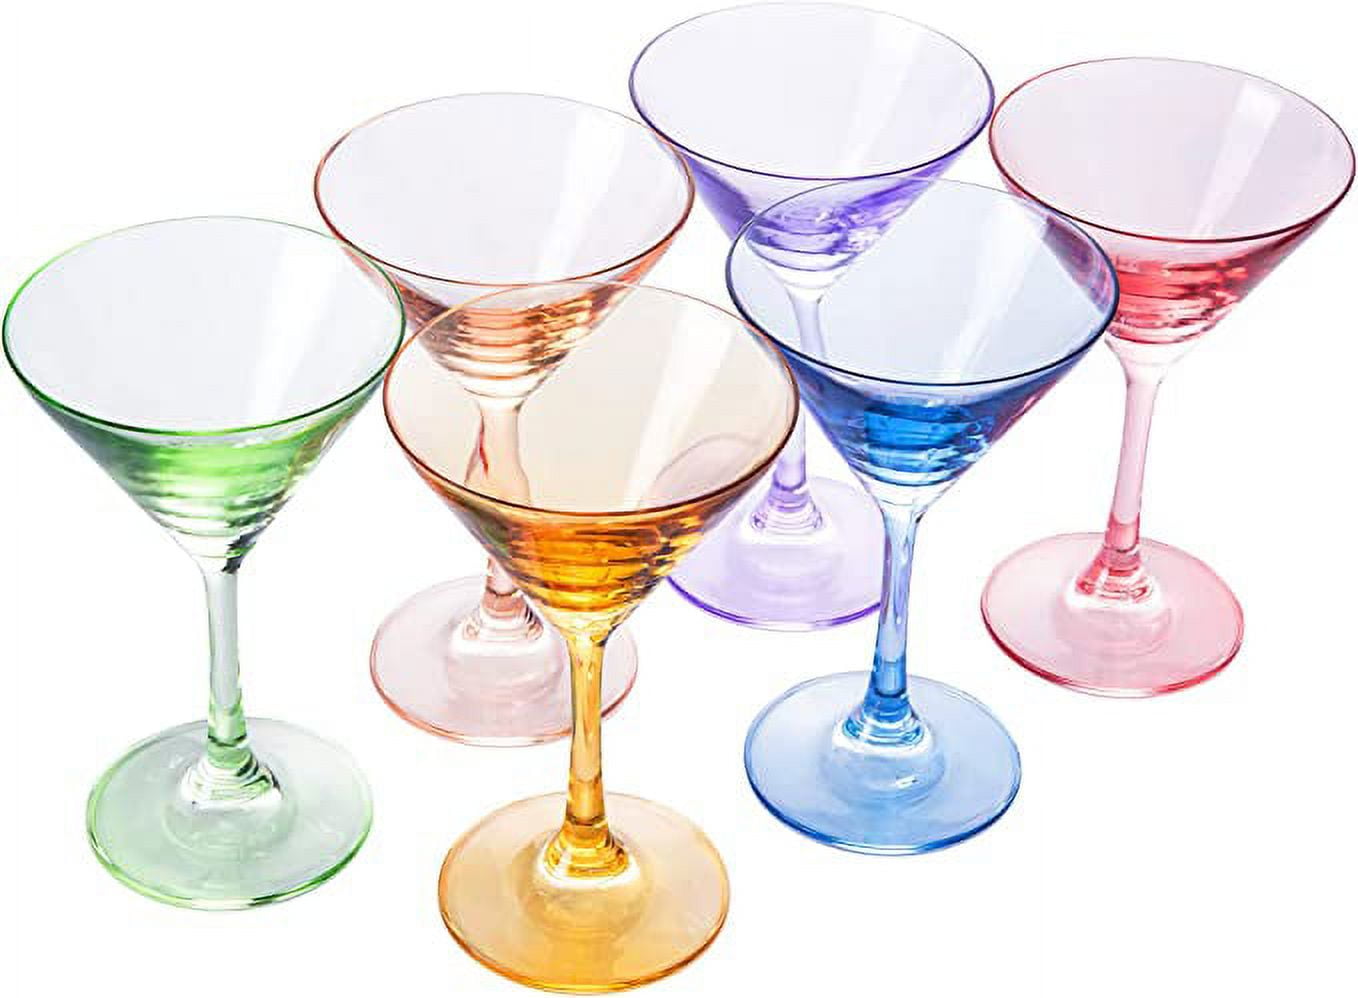 PARNOO Cocktail Glasses 8 Ounce - Set of 8 Seamless Cosmopolitan, Martini  Glasses with Heavy Base – …See more PARNOO Cocktail Glasses 8 Ounce - Set  of